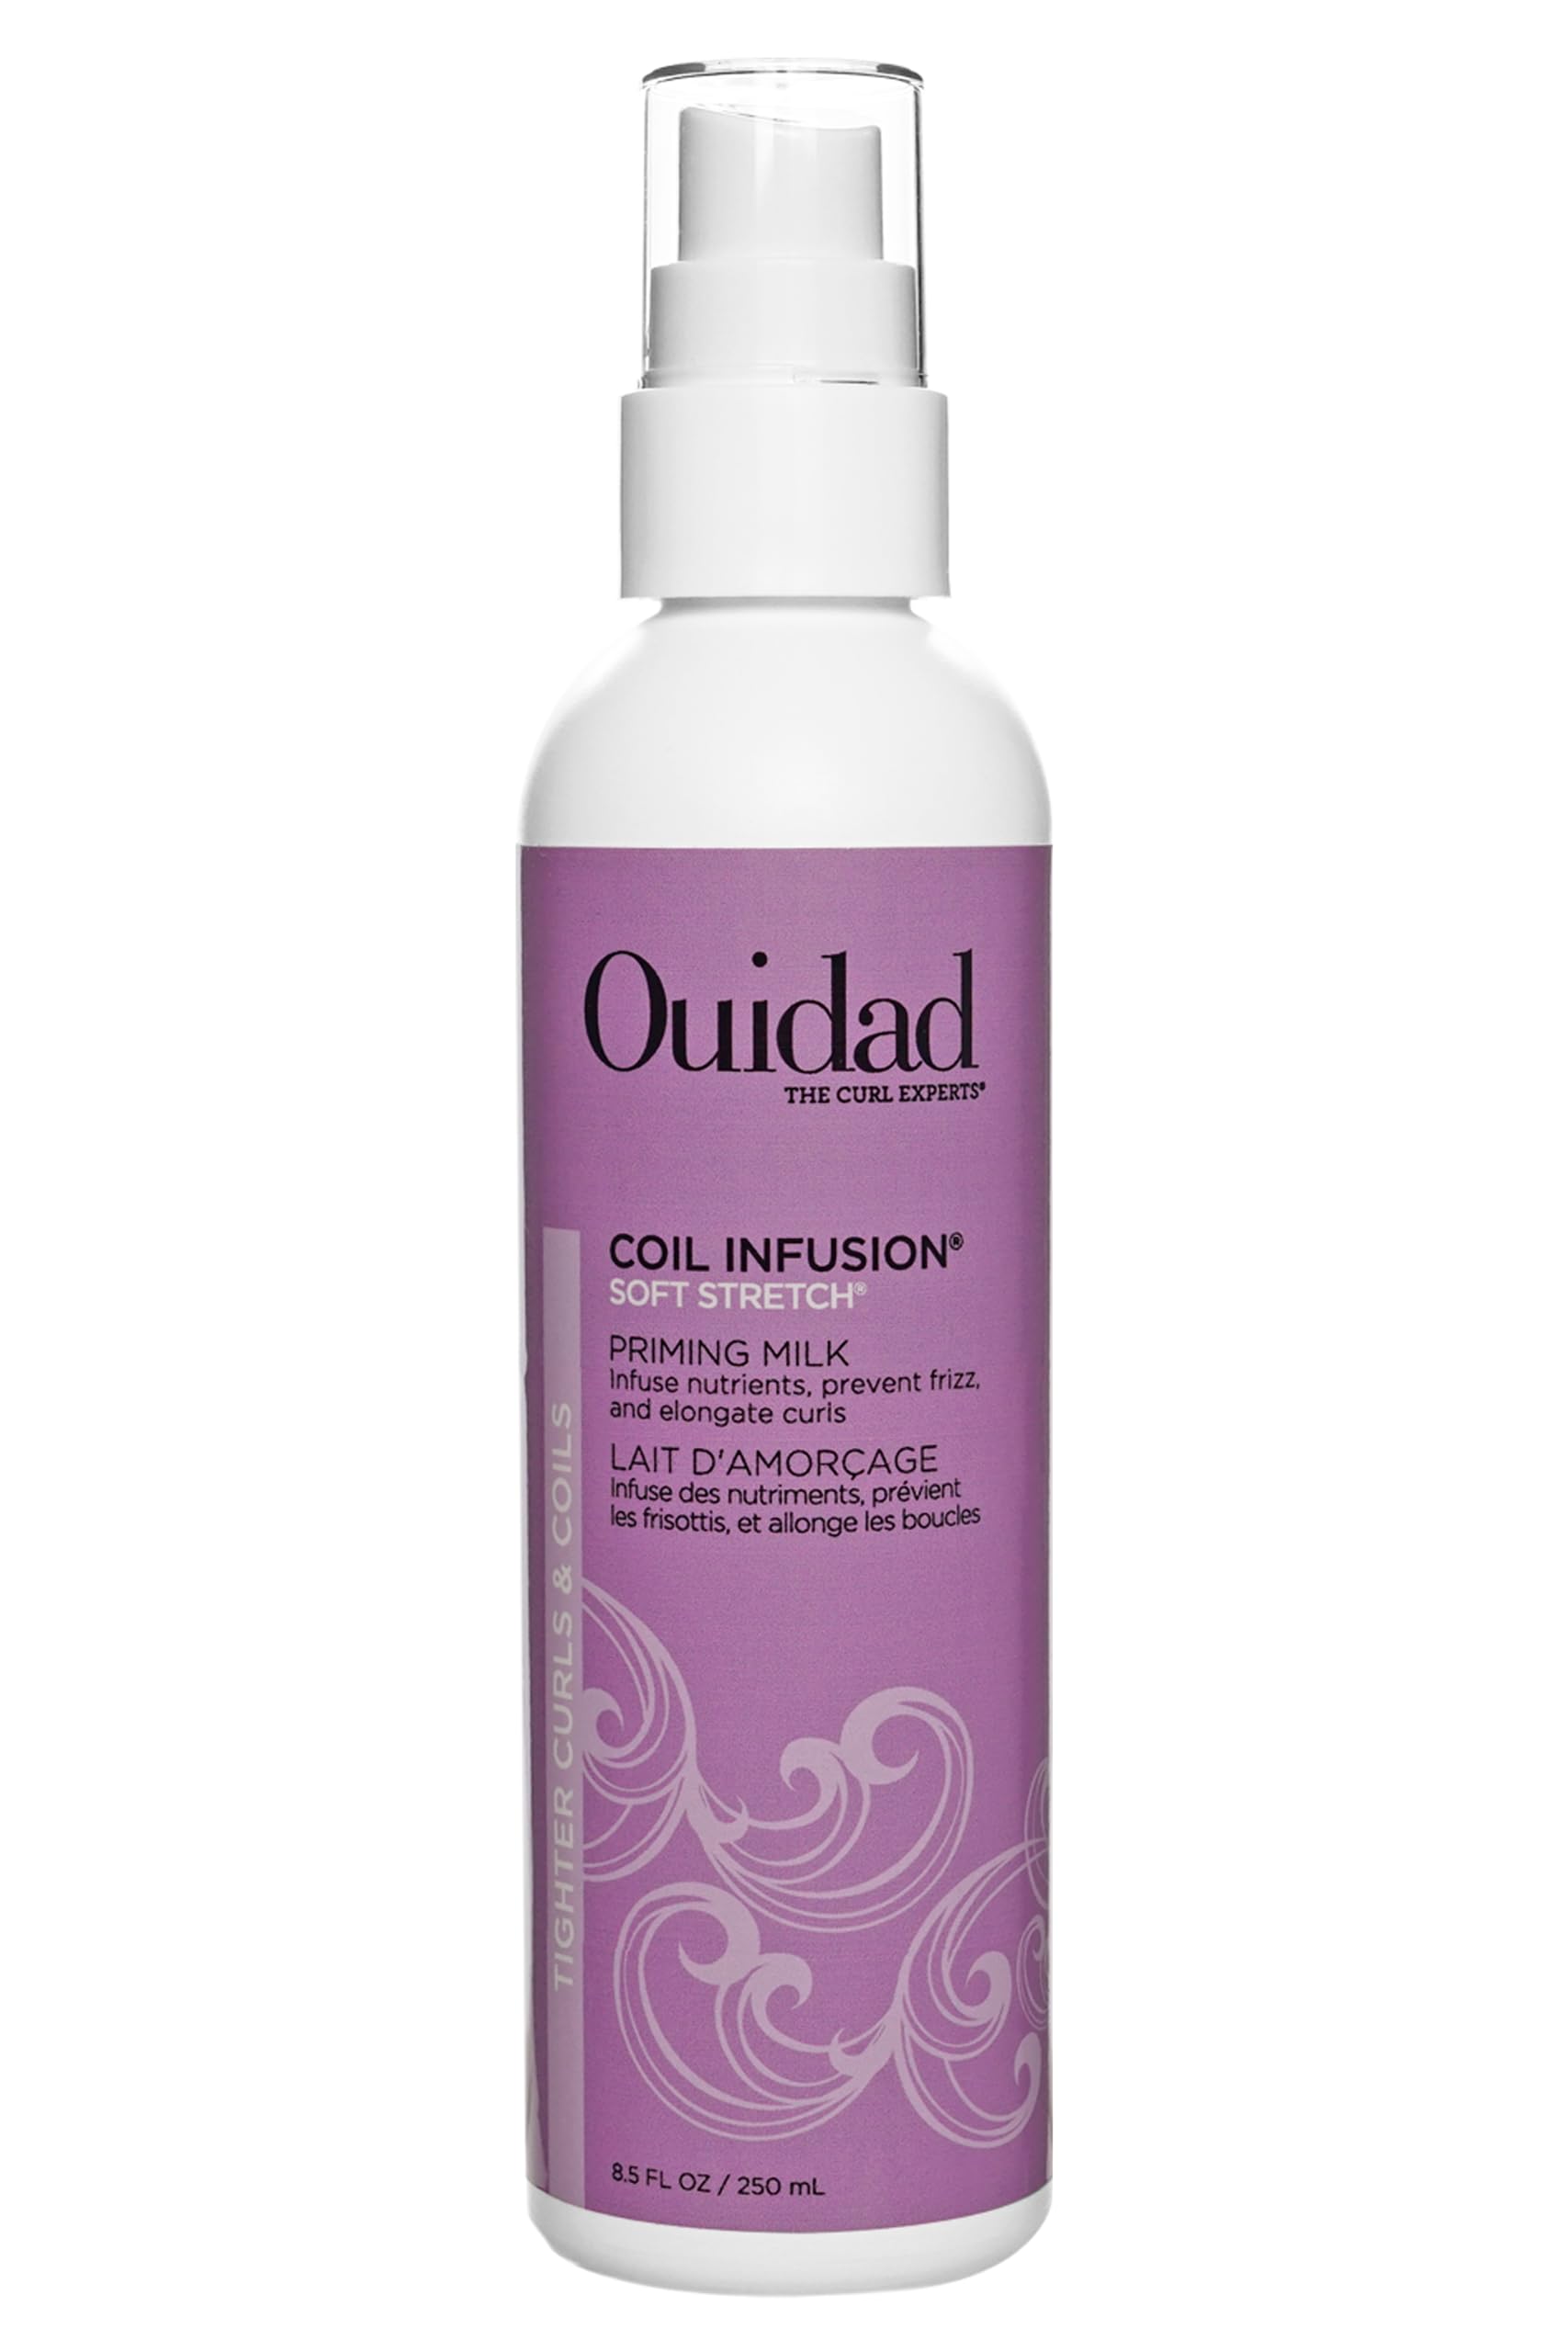 OUIDAD Coil Infusion Soft Stretch Curl Priming Milk - Primer & Leave-in Treatment - Moisturizes, Defines, and Strengthens - 8.5 oz